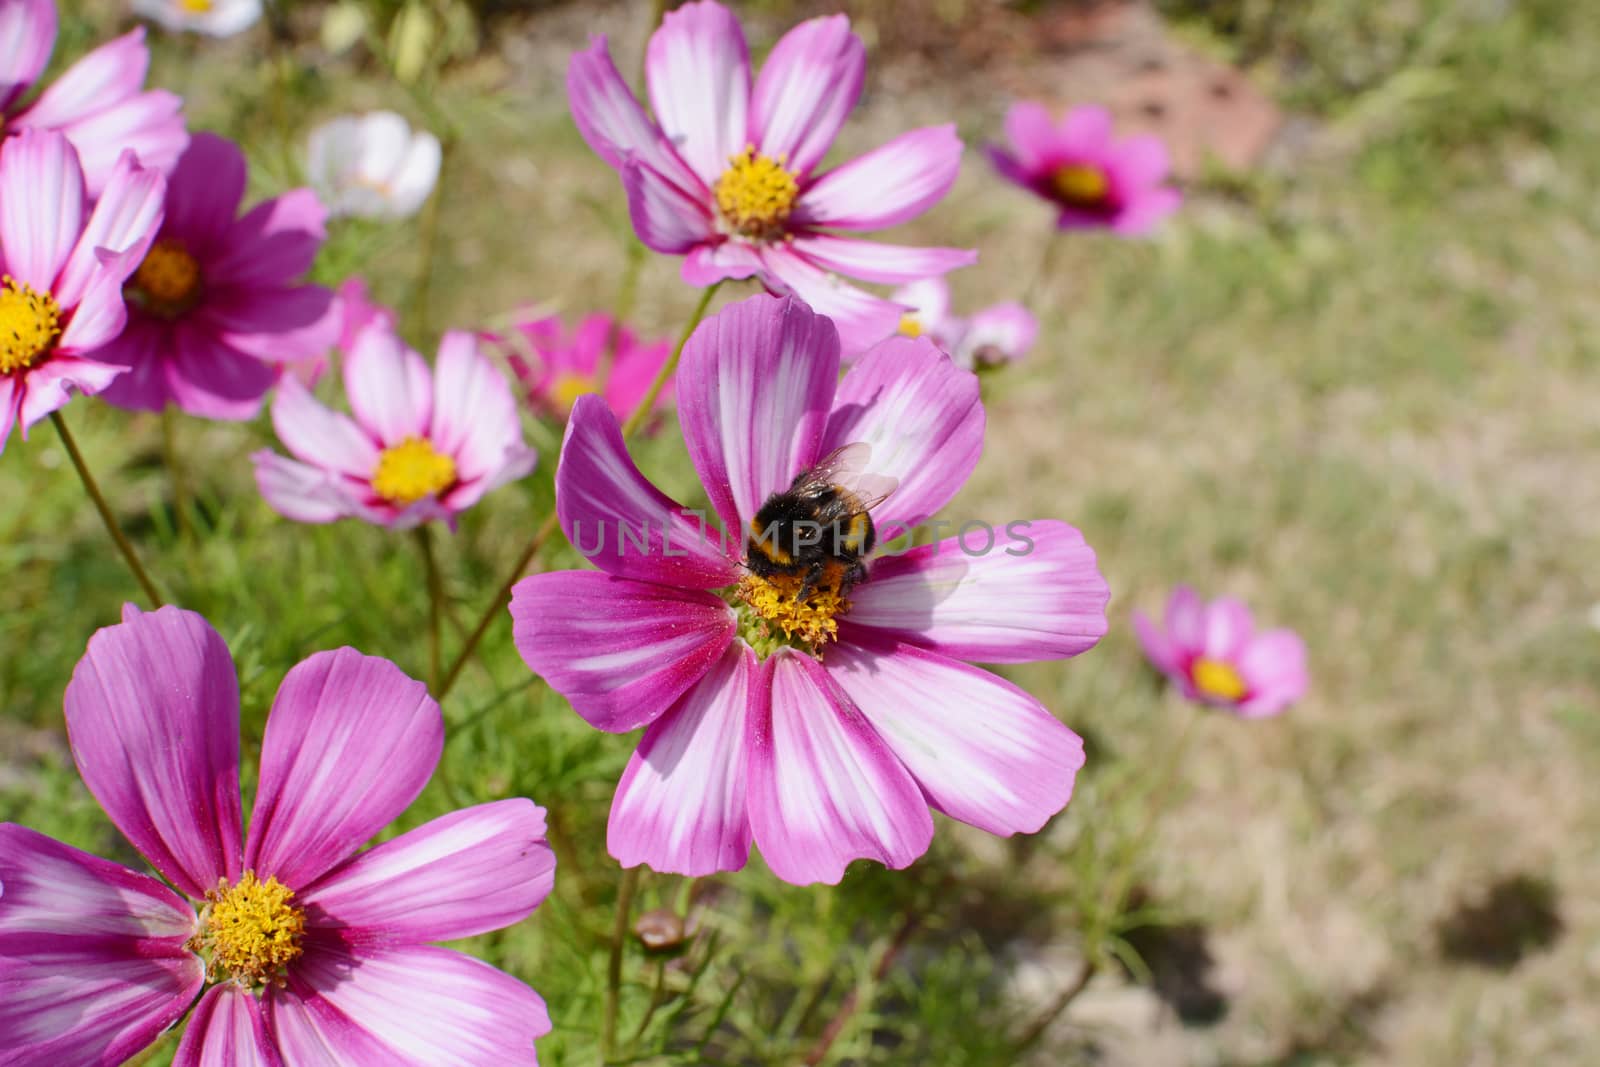 Bumble bee feeding from pink and white Cosmos flower by sarahdoow